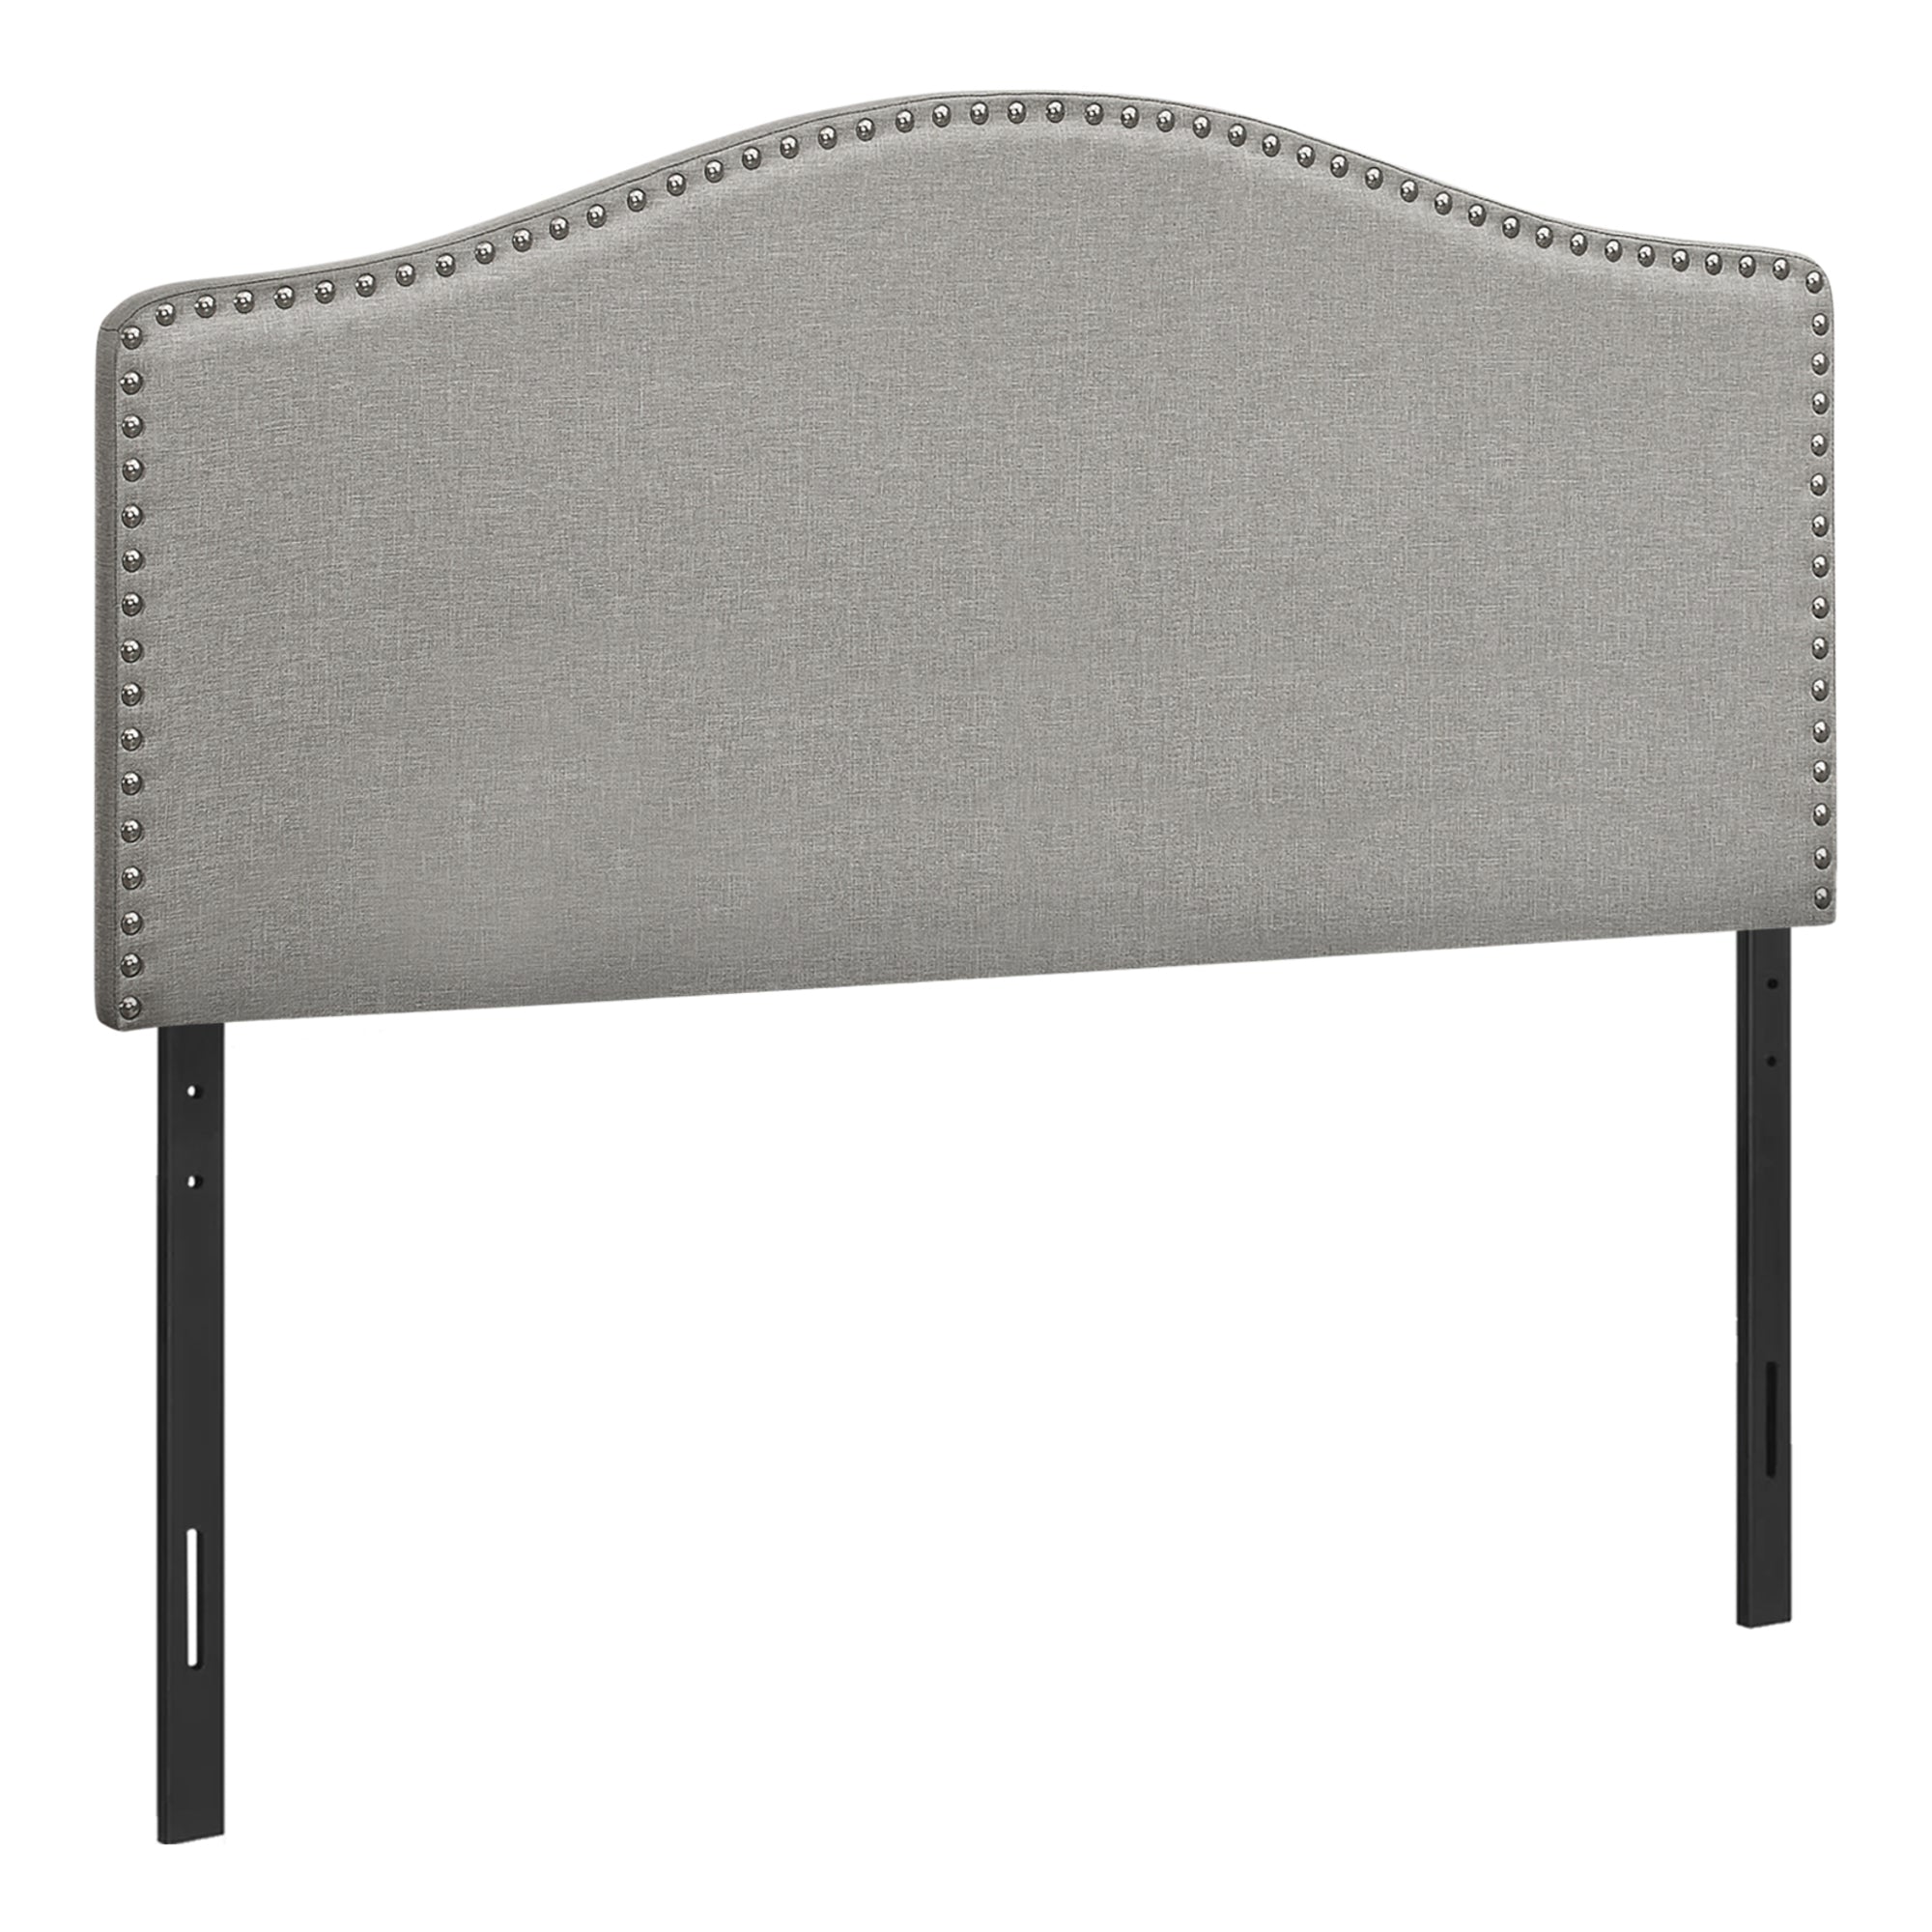 MN-556013F    Headboard, Bedroom, Full Size, Upholstered, Leather Look, Wooden Frame, Grey, Black, Contemporary, Modern